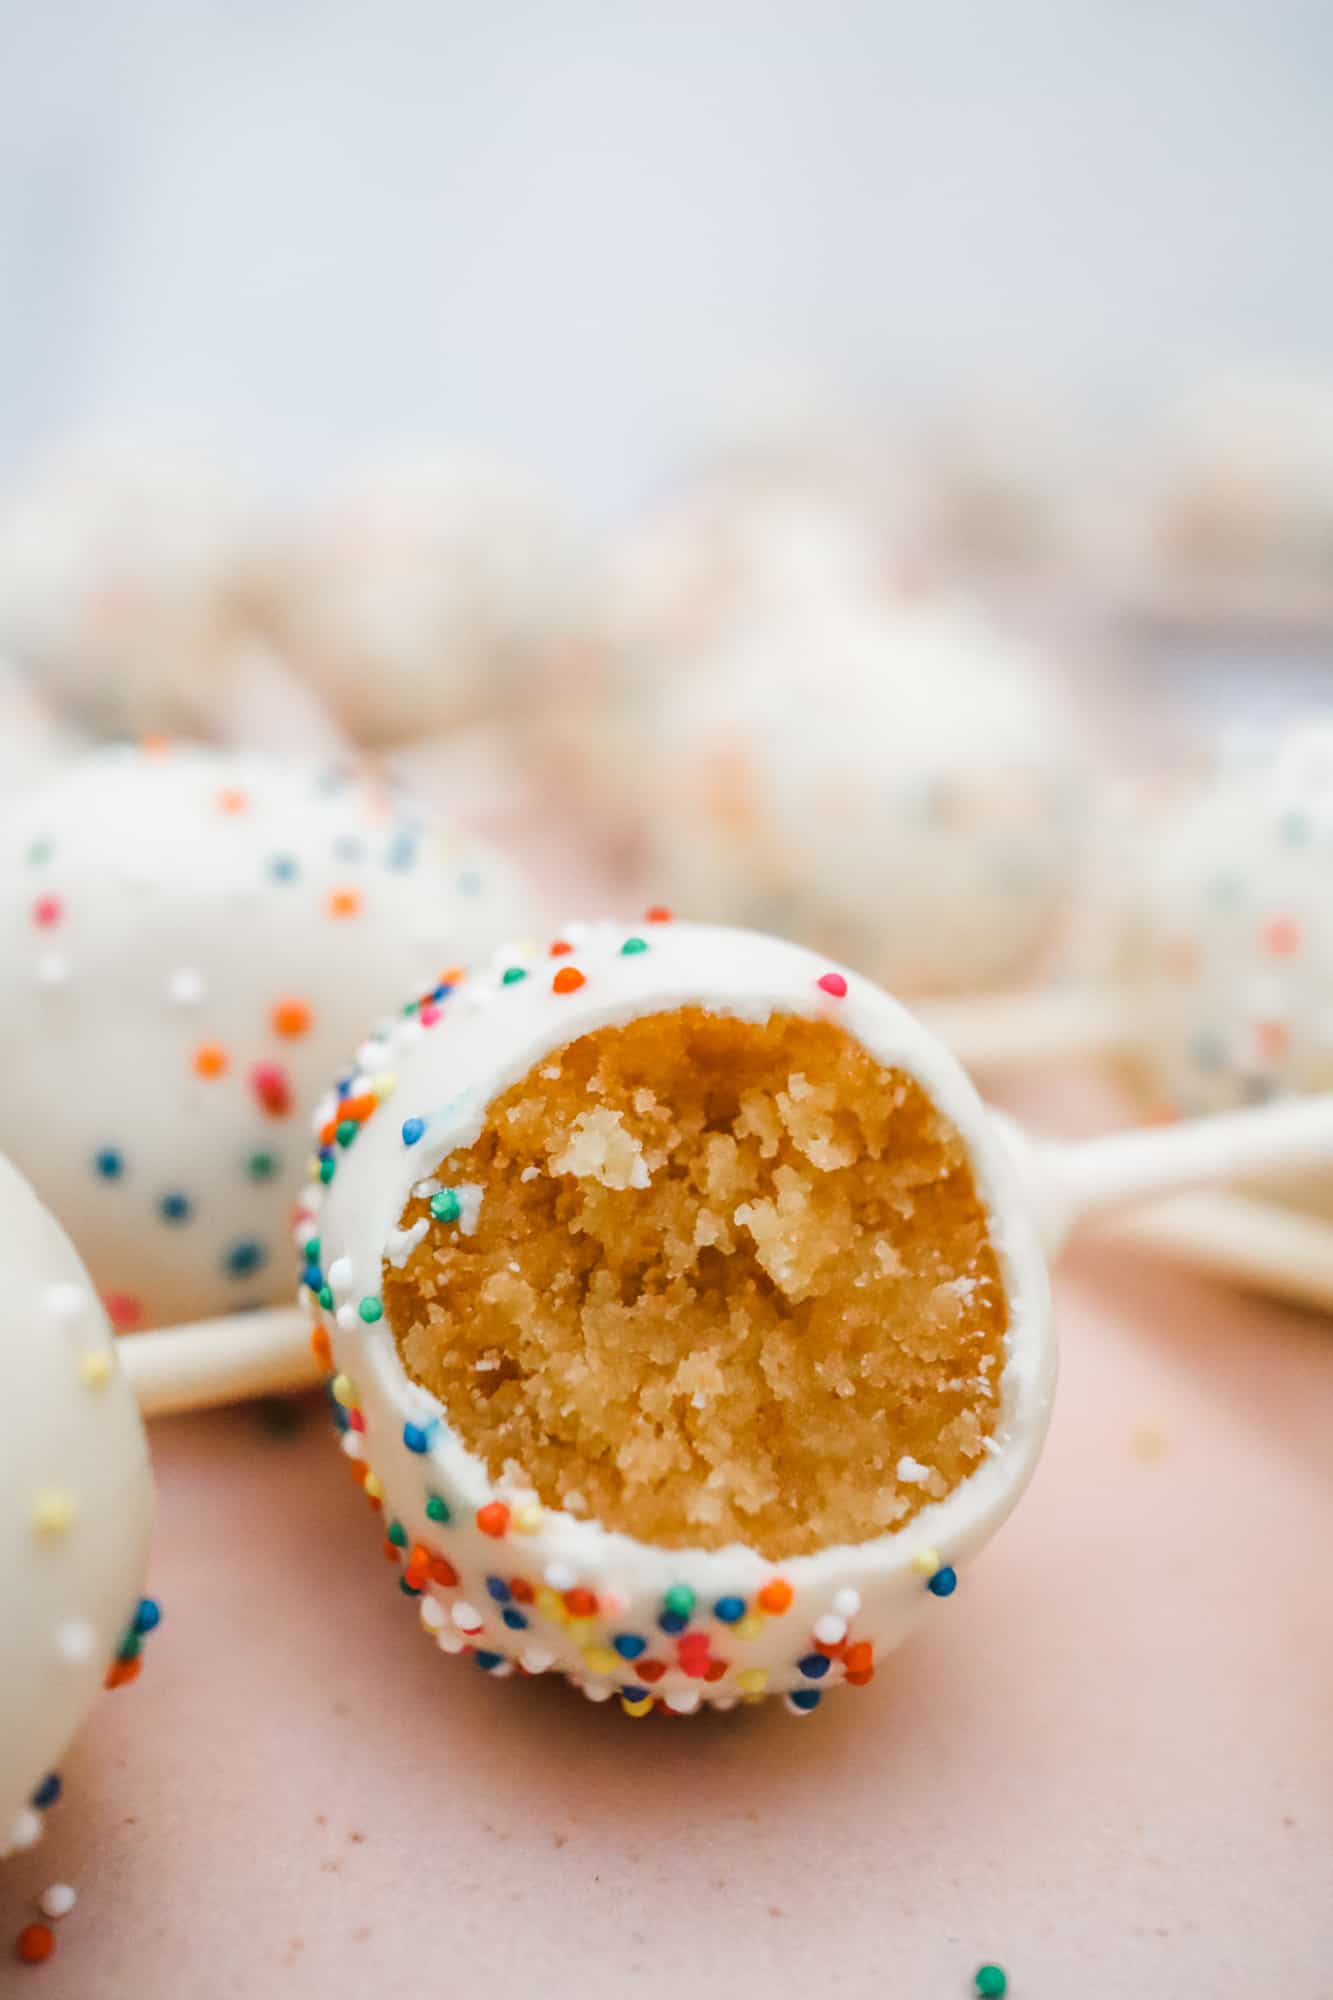 Cake Pop coated in Vanilla Candy Coating with Rainbow Sprinkles